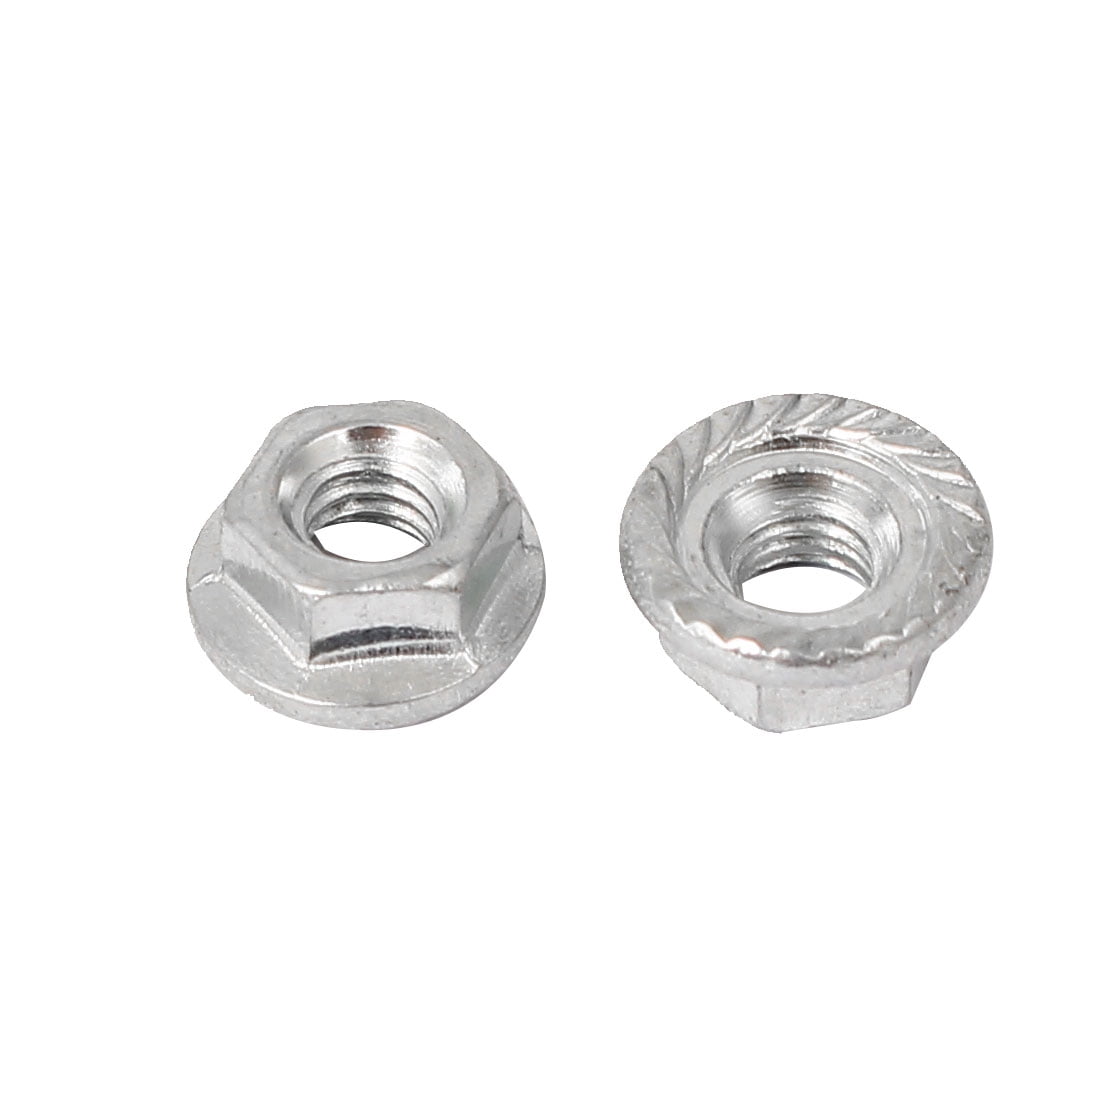 Qty 1 M4 304 Stainless Steel Hex Serrated Nut 4mm Flange Nuts 